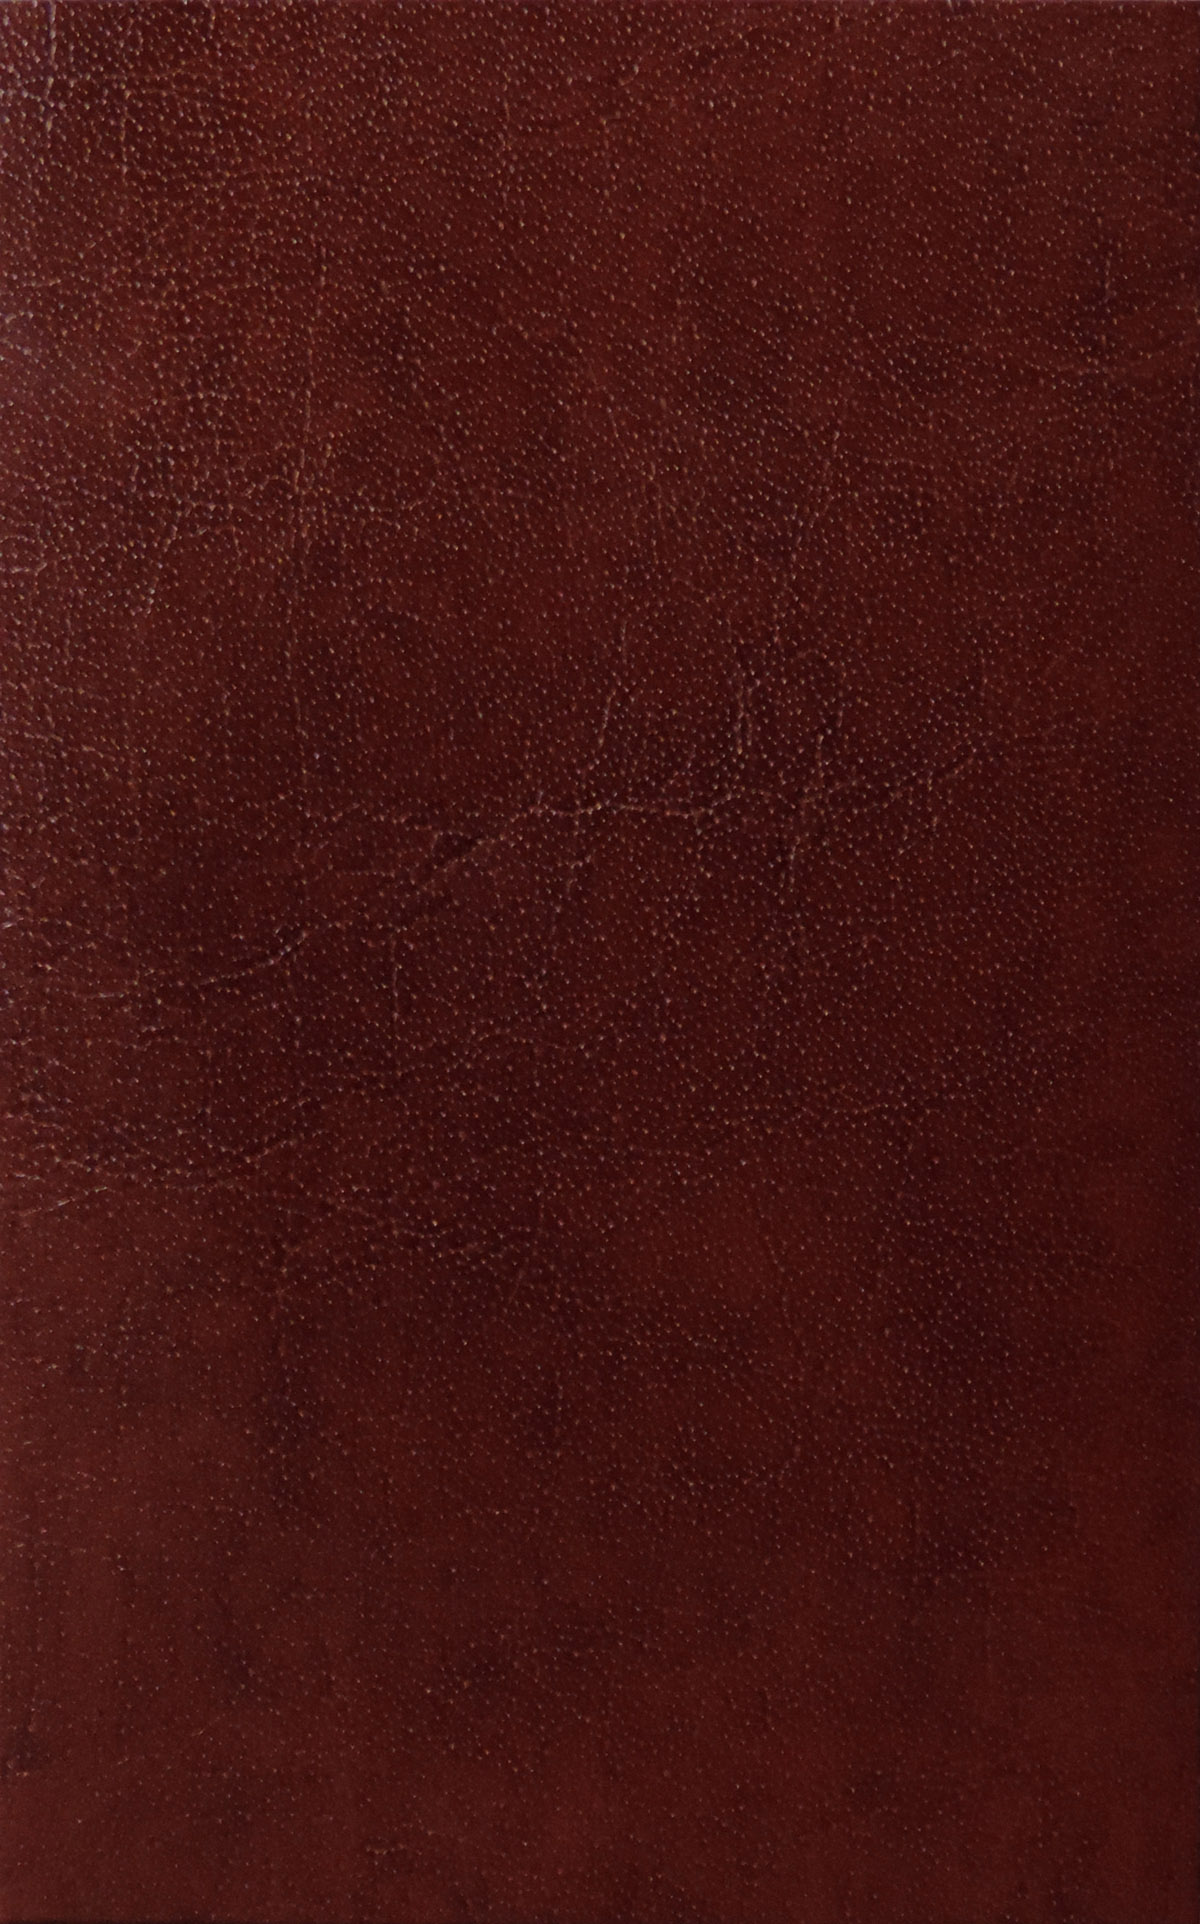 Del Mar bonded leather menu covers Swatch